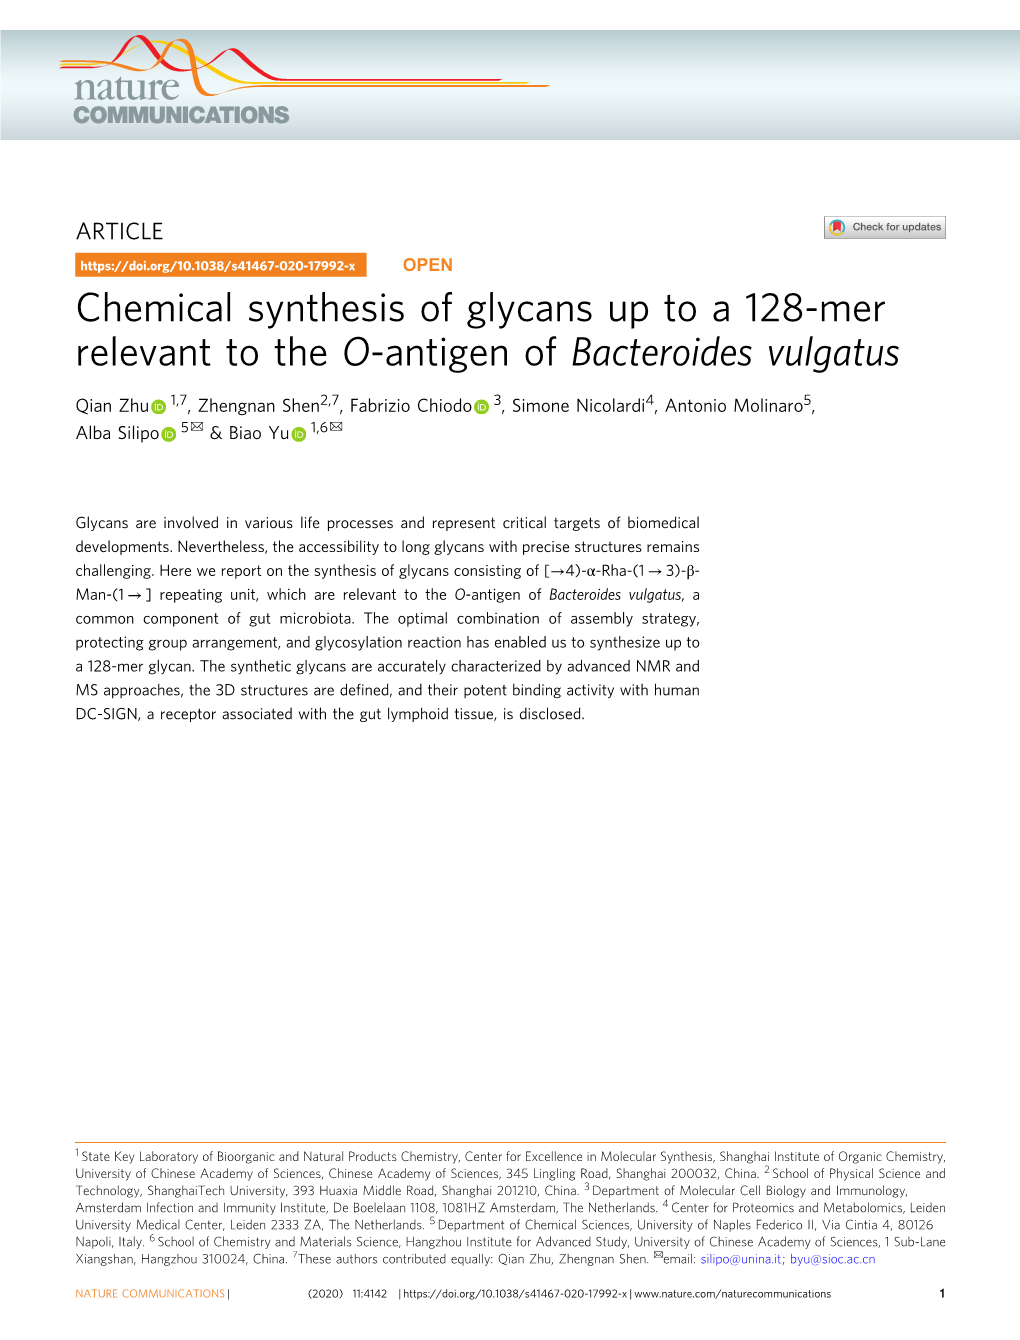 Chemical Synthesis of Glycans up to a 128-Mer Relevant to the O-Antigen of Bacteroides Vulgatus